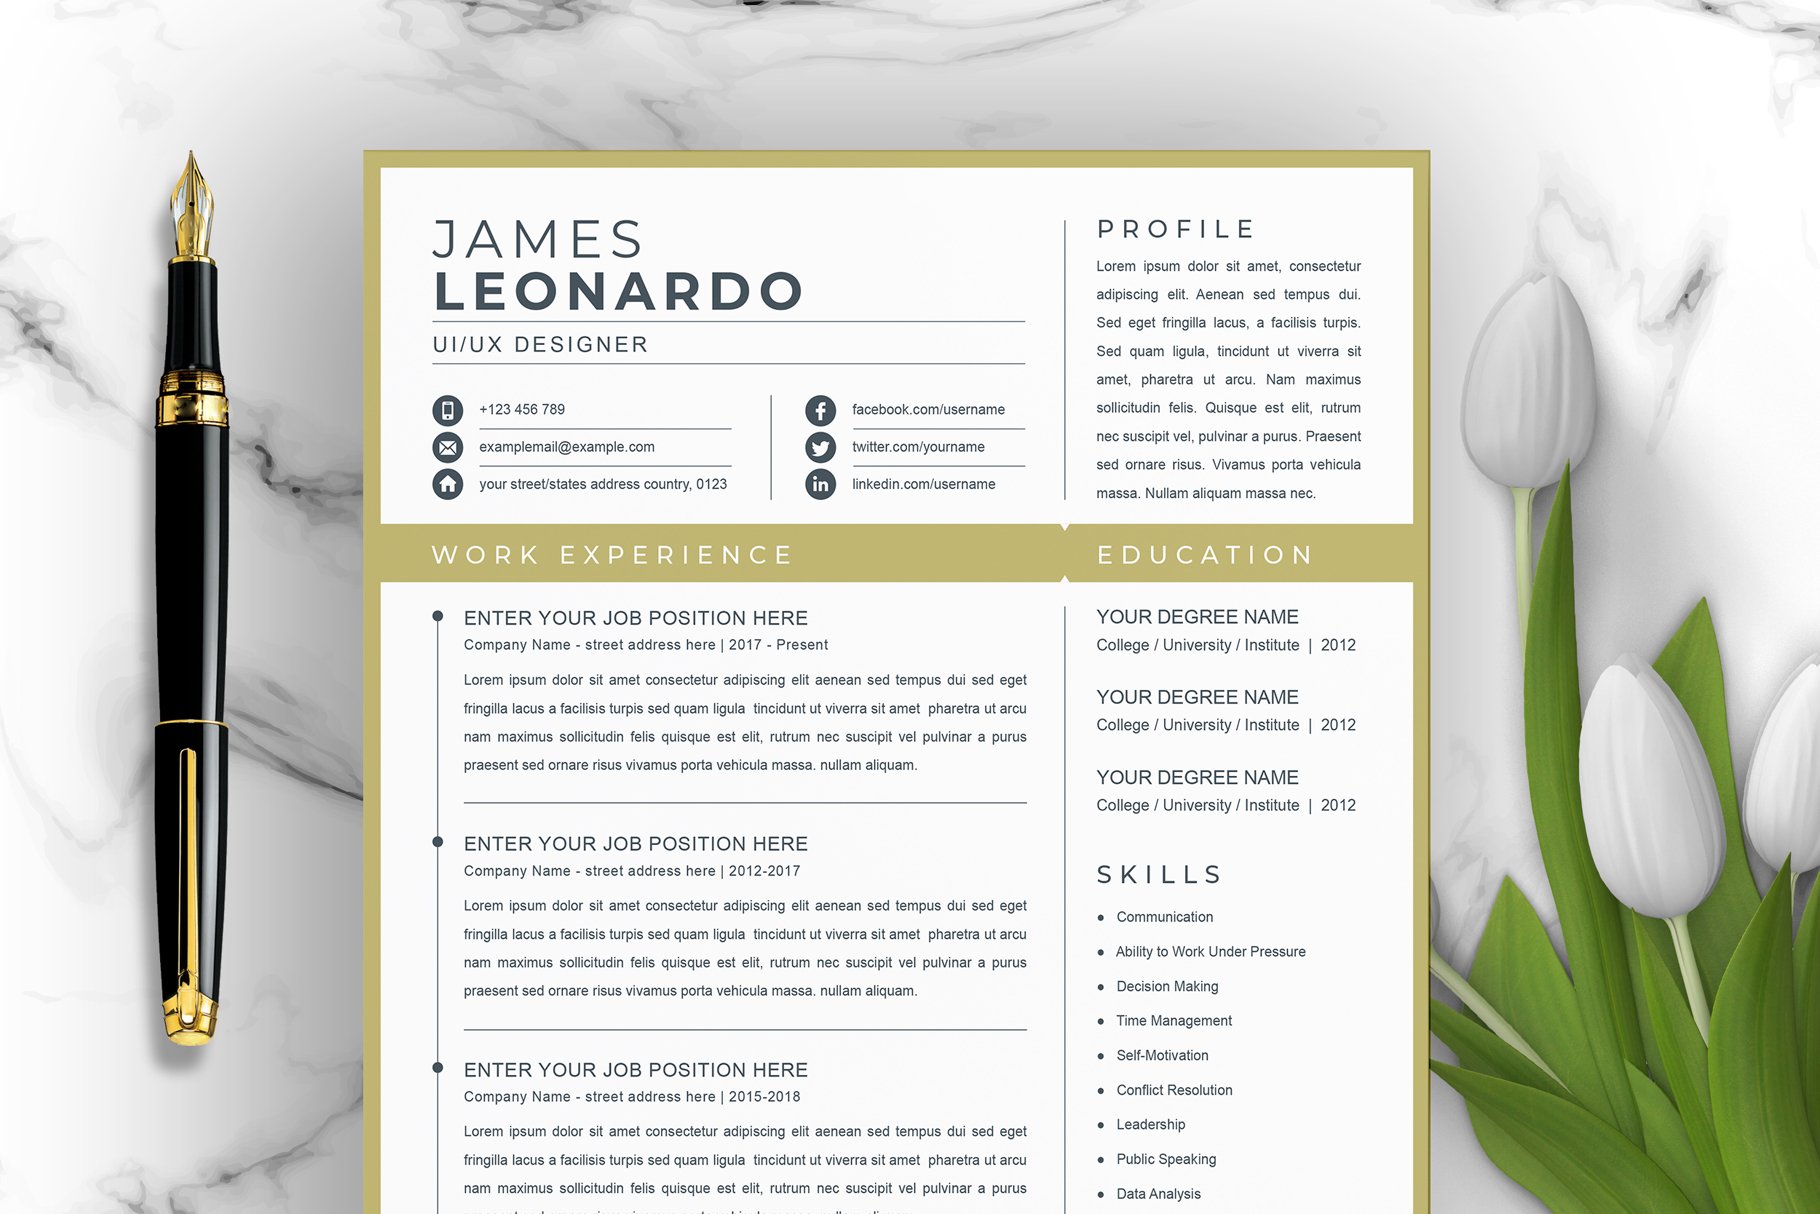 Resume Template  4 Pages Pack - Design Cuts